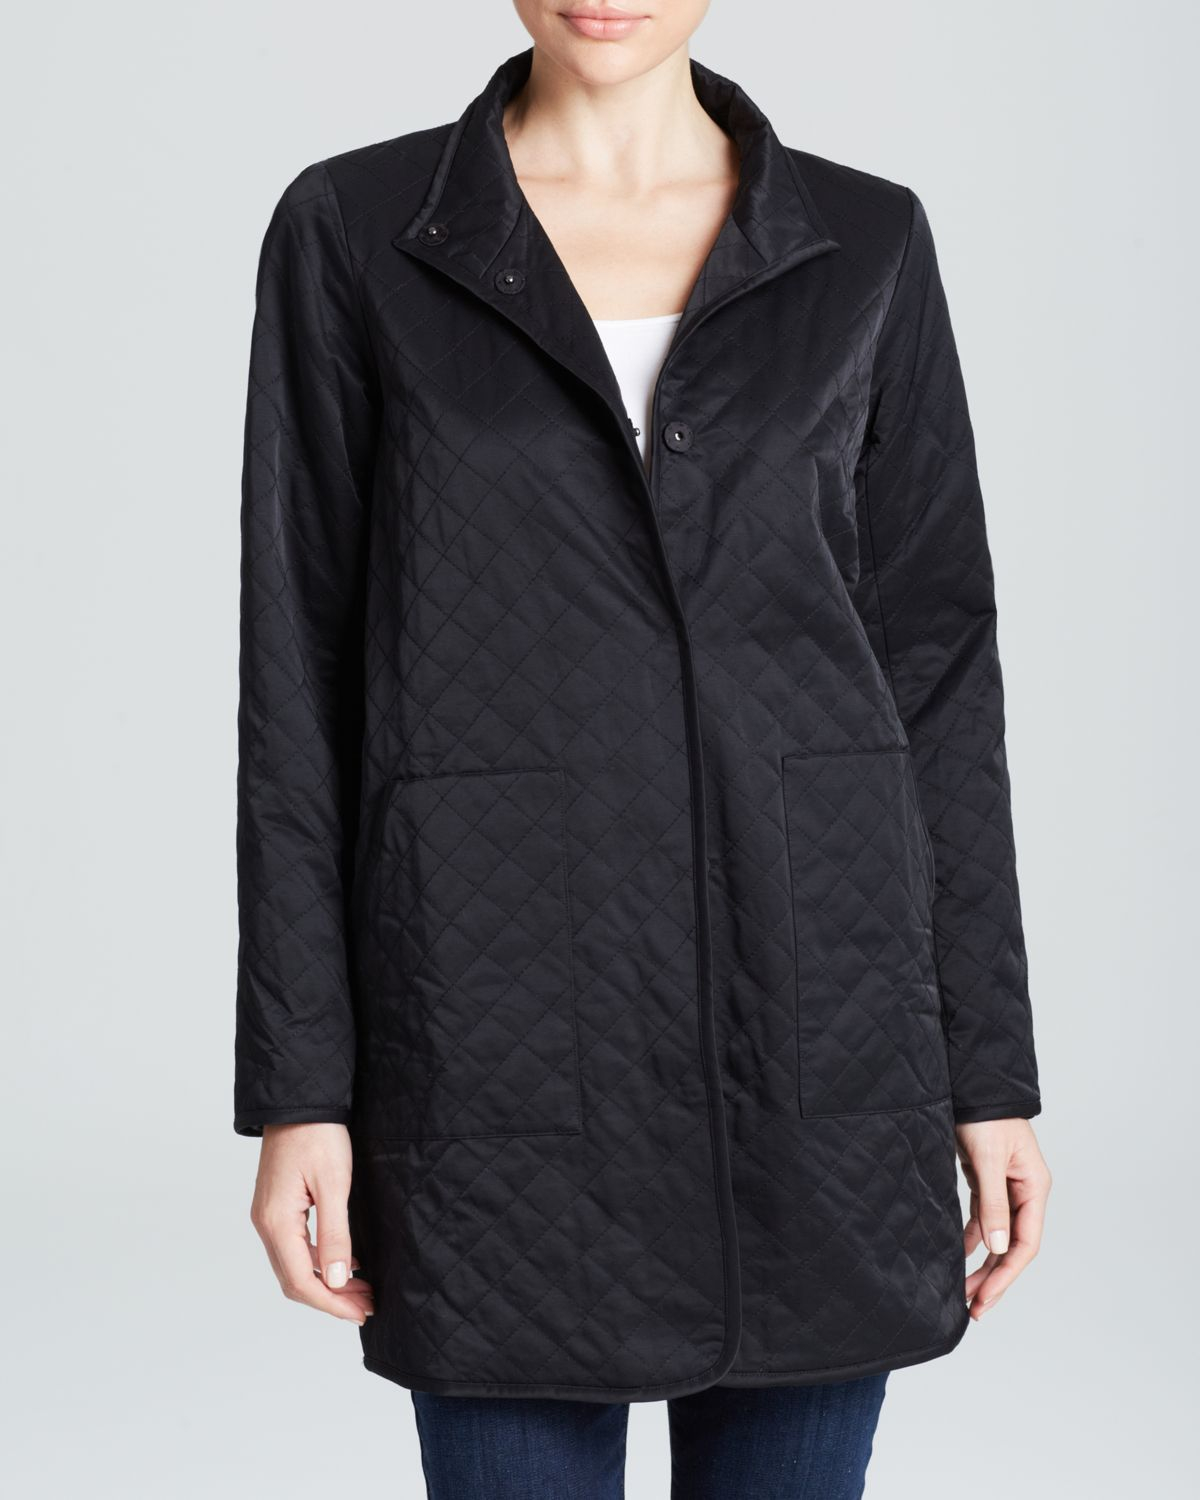 Eileen Fisher Quilted Long Jacket in Black - Lyst